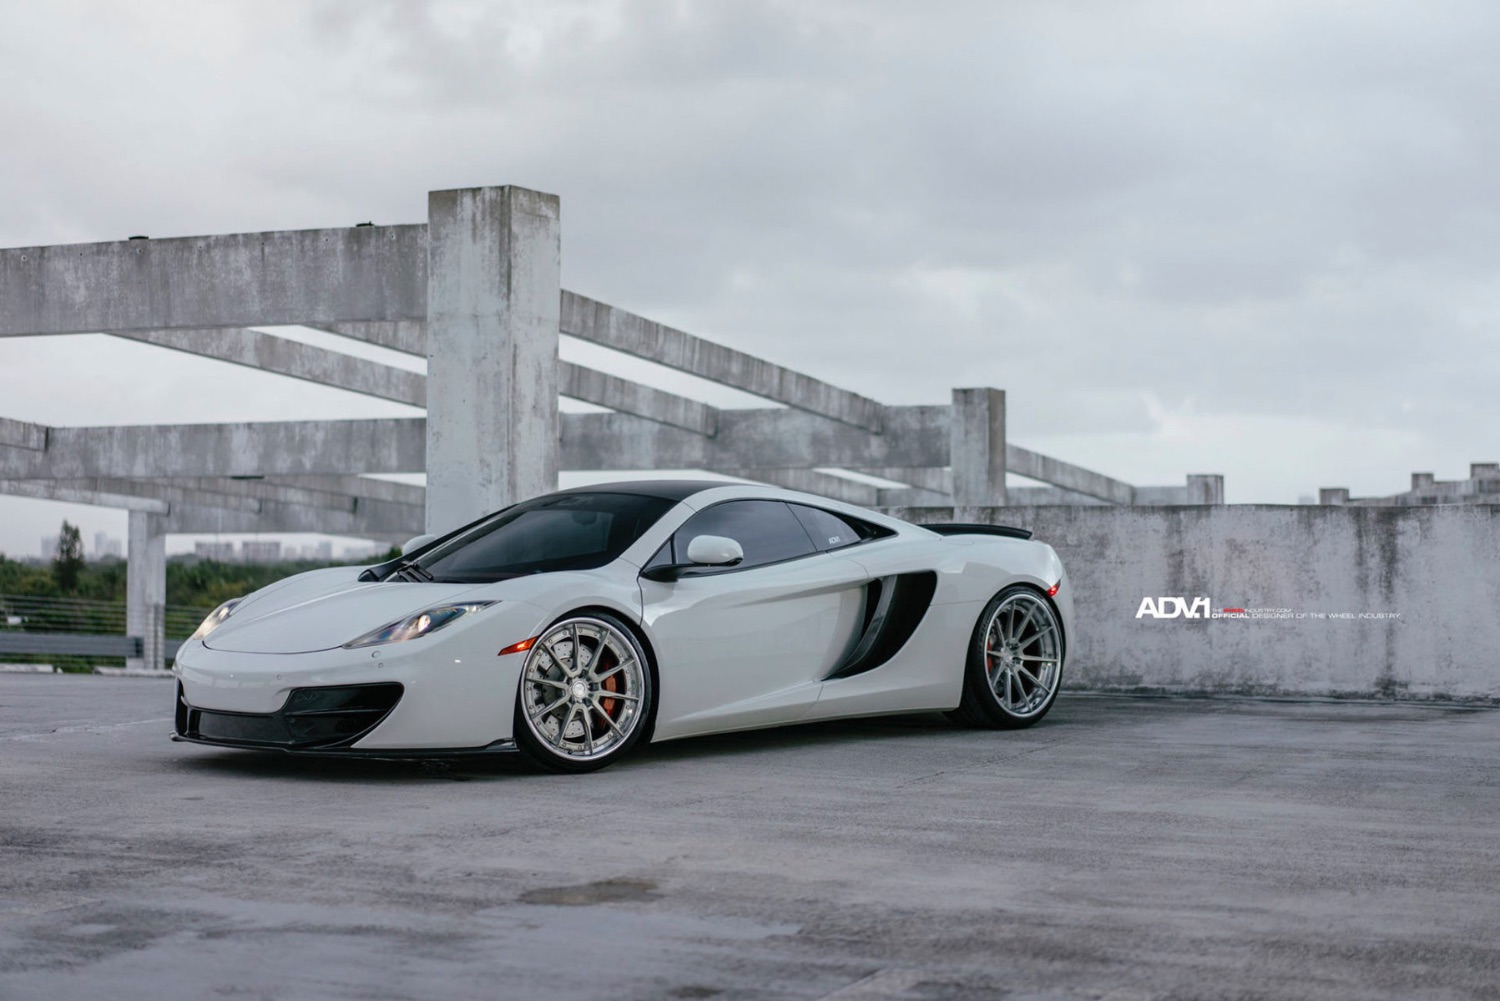 adv1-wheels-mclaren-mp412c-white-forged-custom-racing-modified-lowered-stance-rims-q